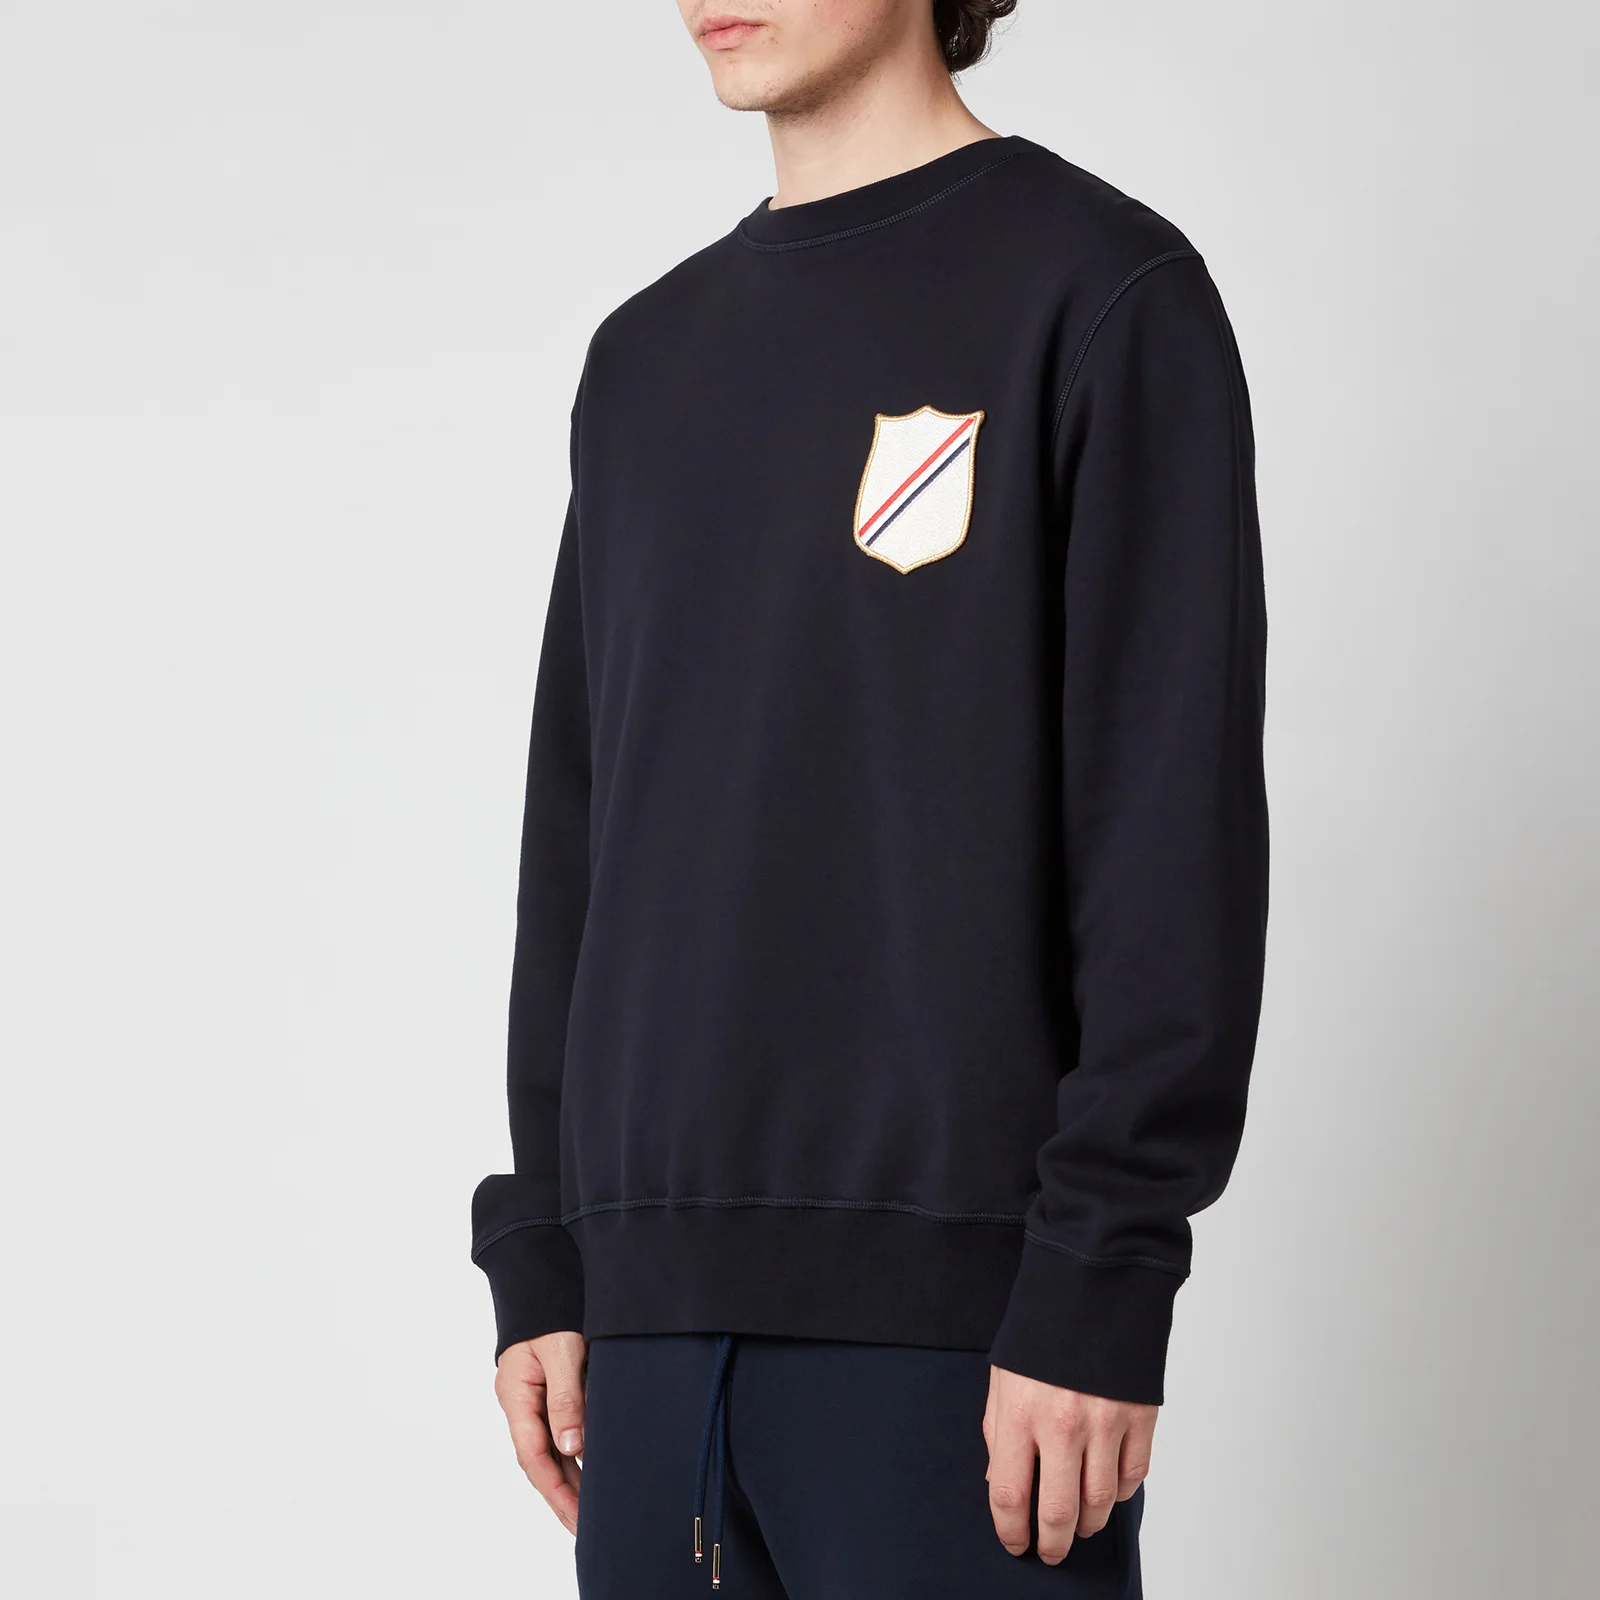 Thom Browne Men's Embroidered Crest Patch Boat Neck Sweatshirt - Navy Image 1